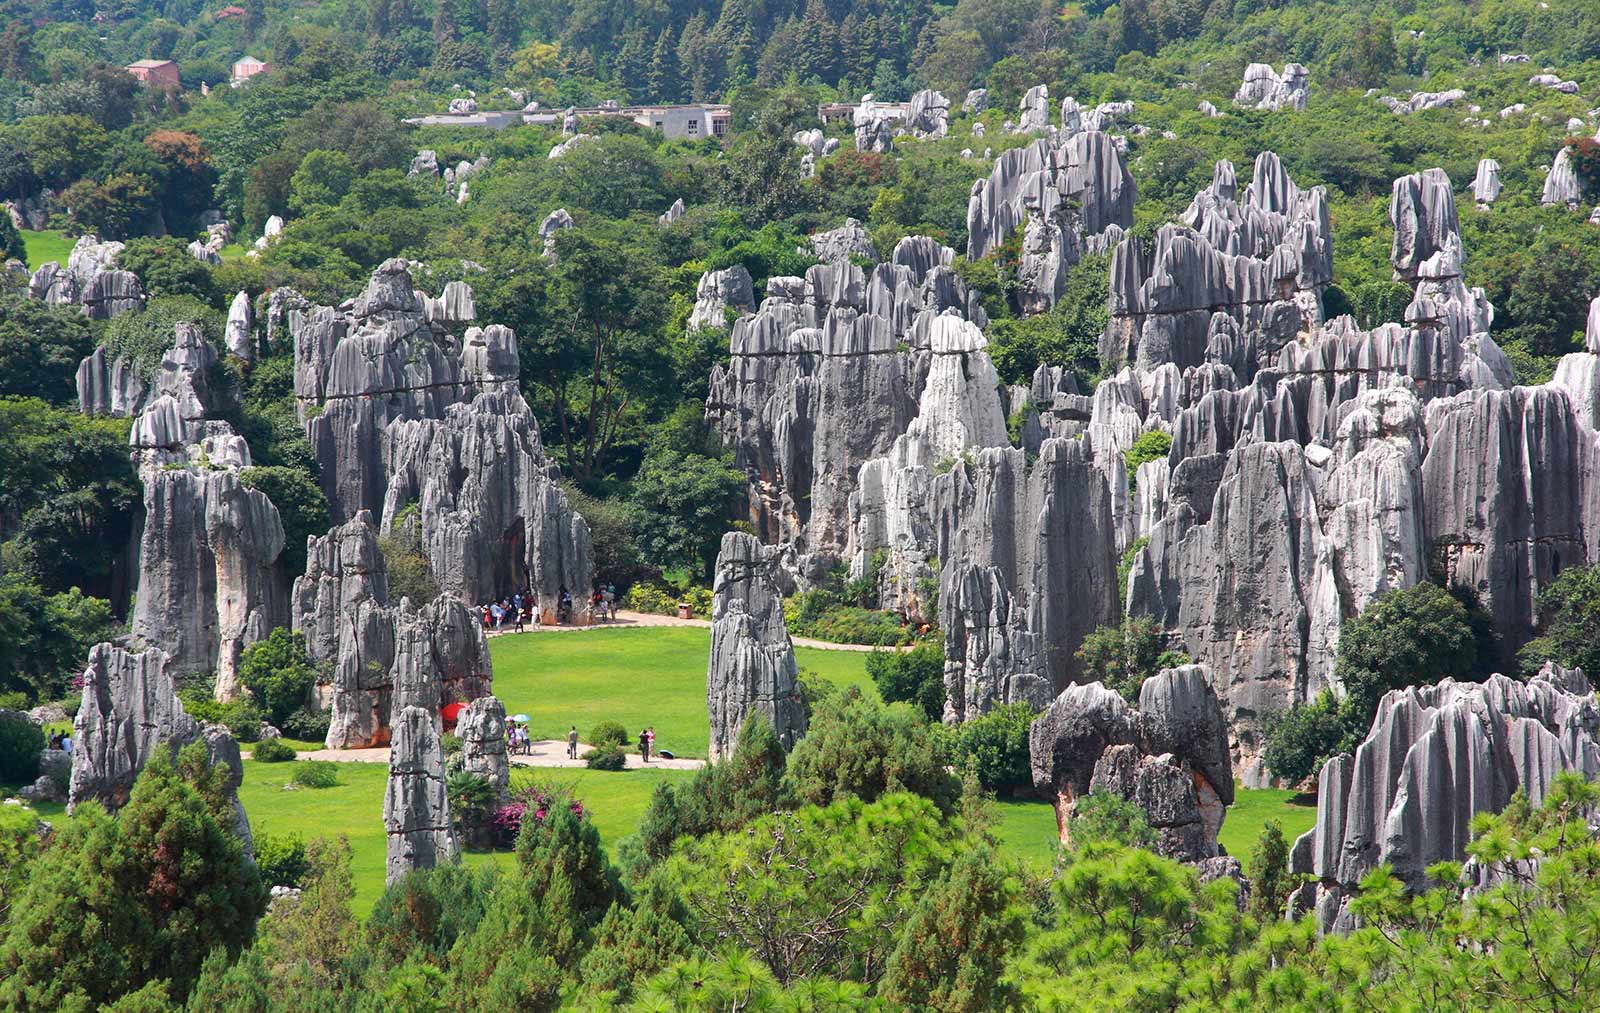 Shilin Stone Forest filled with unique rock formations that stretch over 300 kilometres